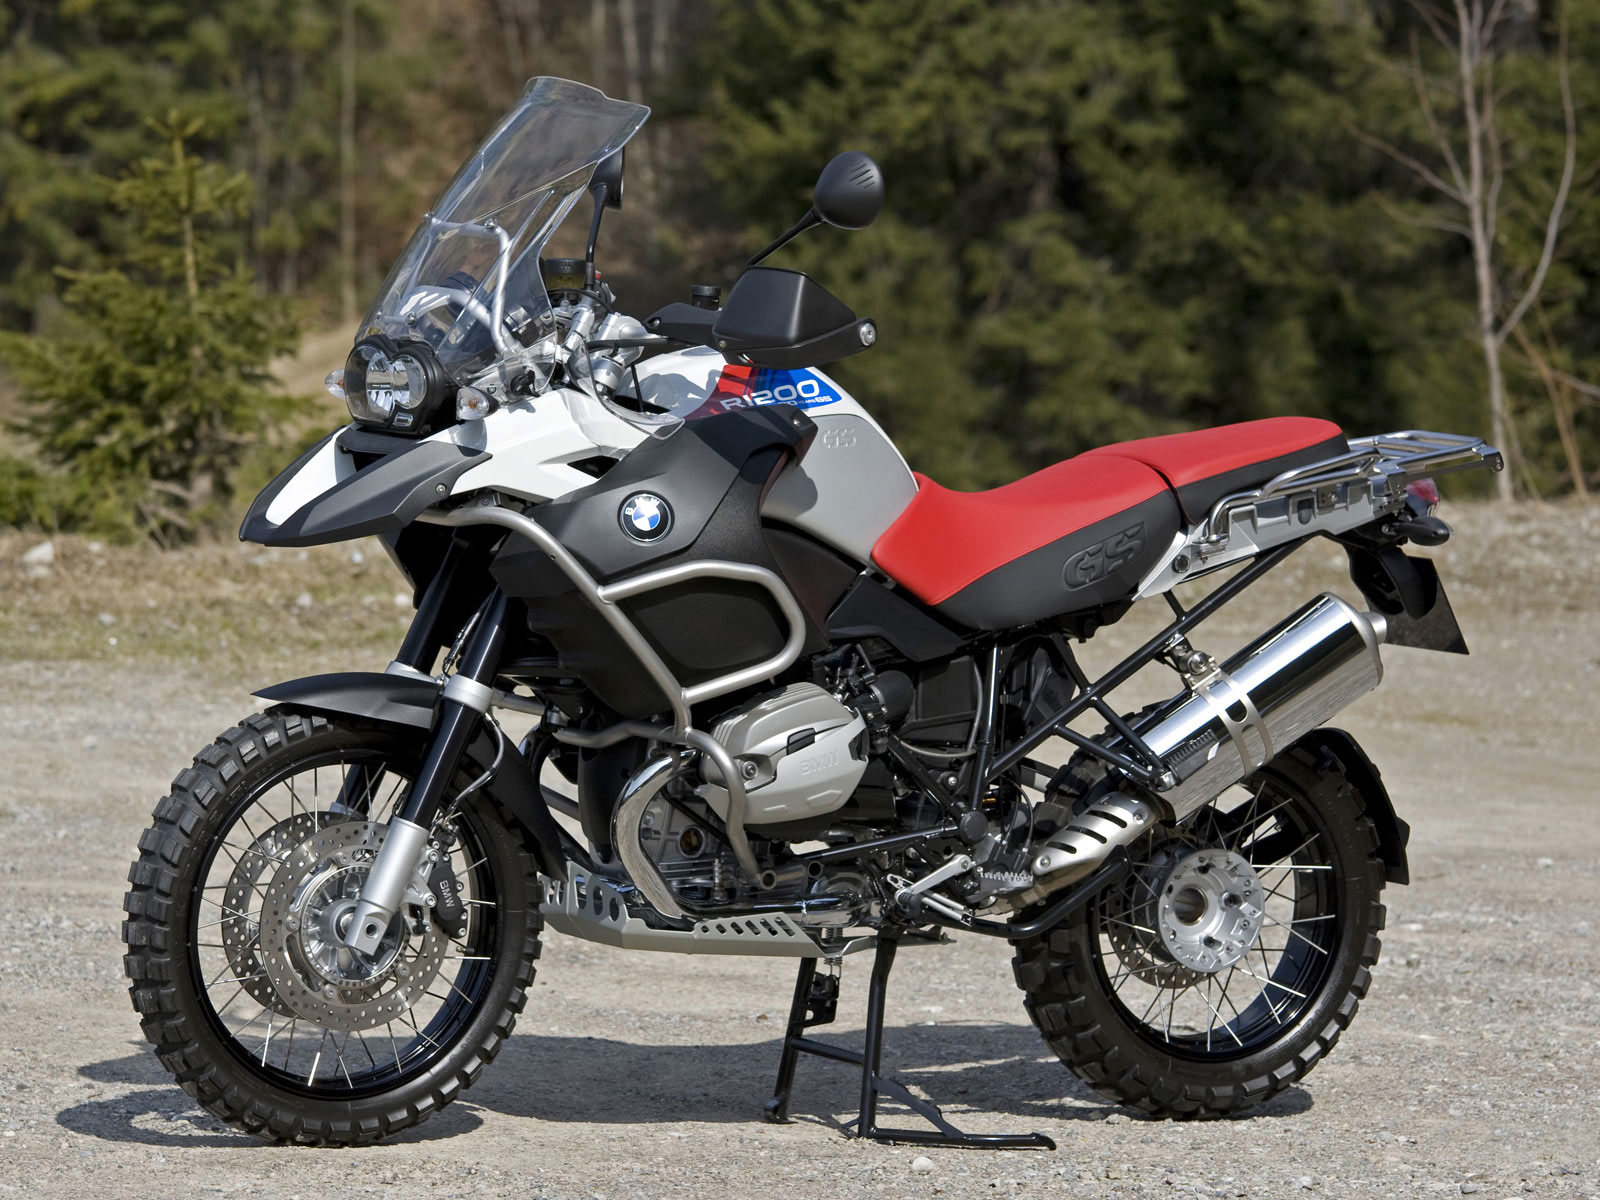 Accident lawyers, BMW R1200GS Adventure "30 Years GS"